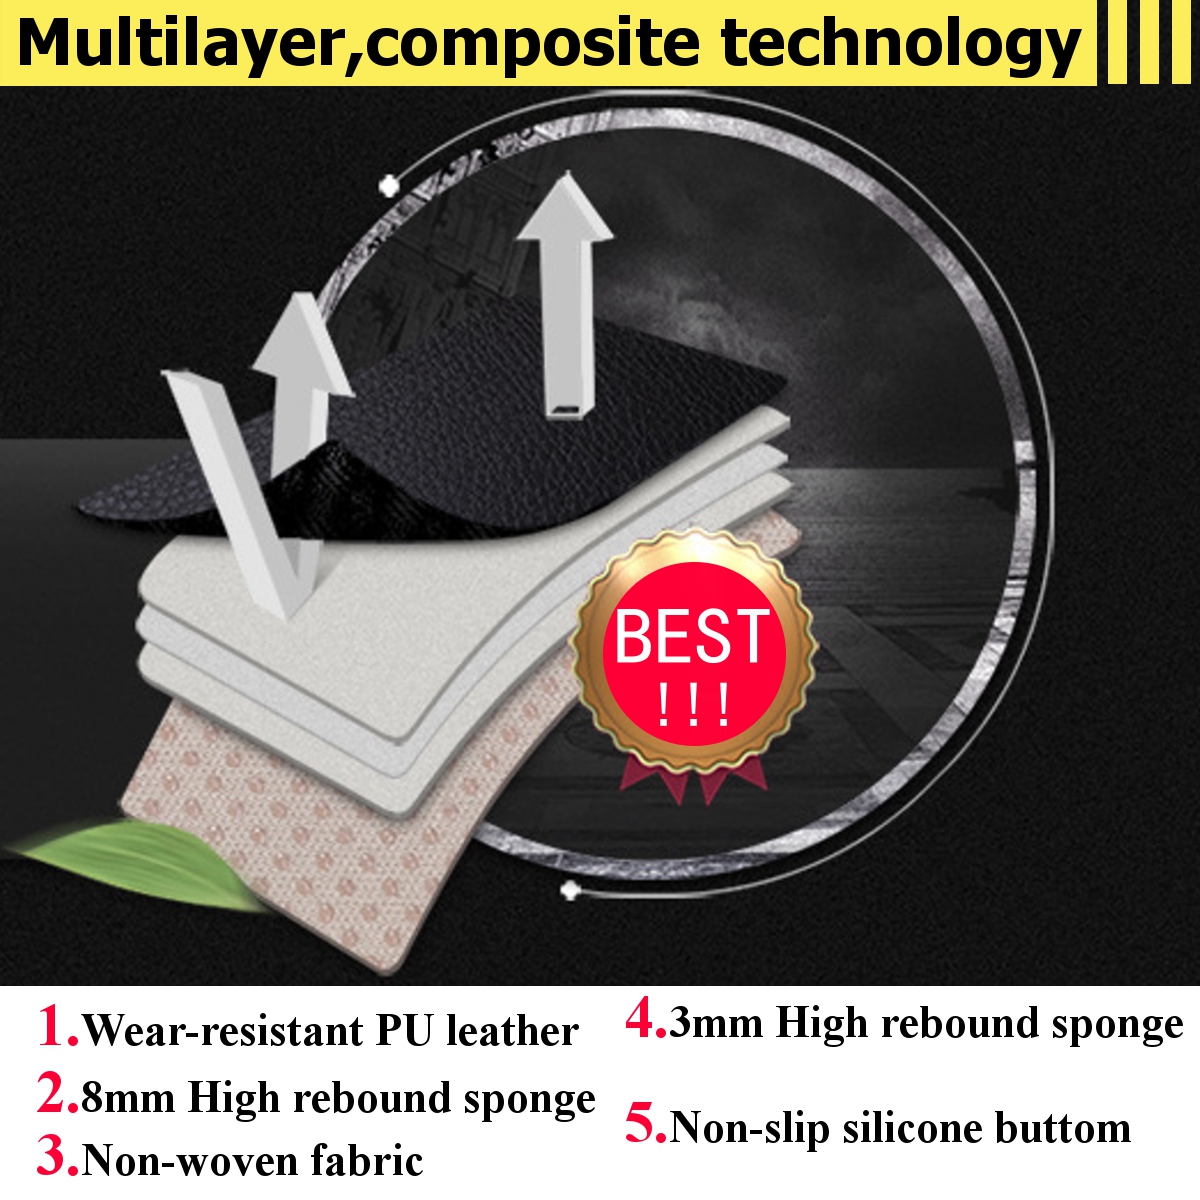 Universal PU Leather Breathable Cushion Pad Car Front Seat Mat Protector Cover Organizer